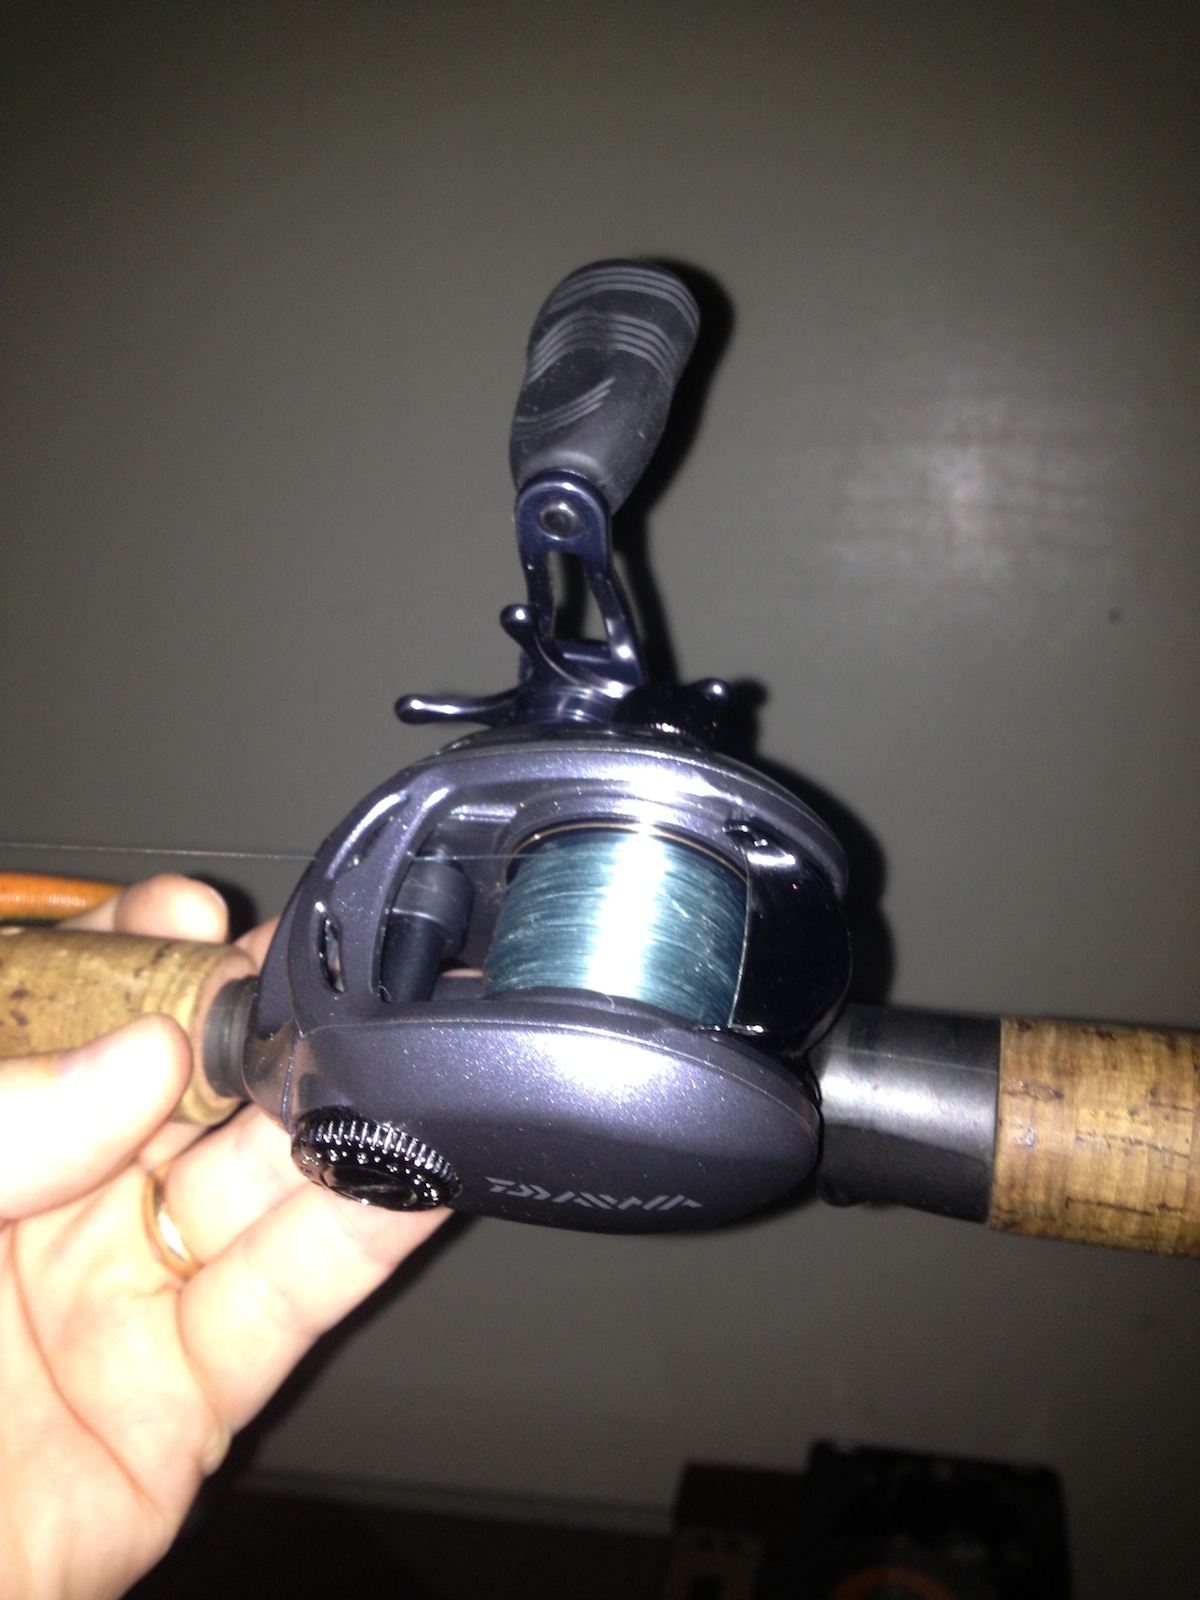 Daiwa Lexa 100Hs First Thoughts. - Fishing Rods, Reels, Line